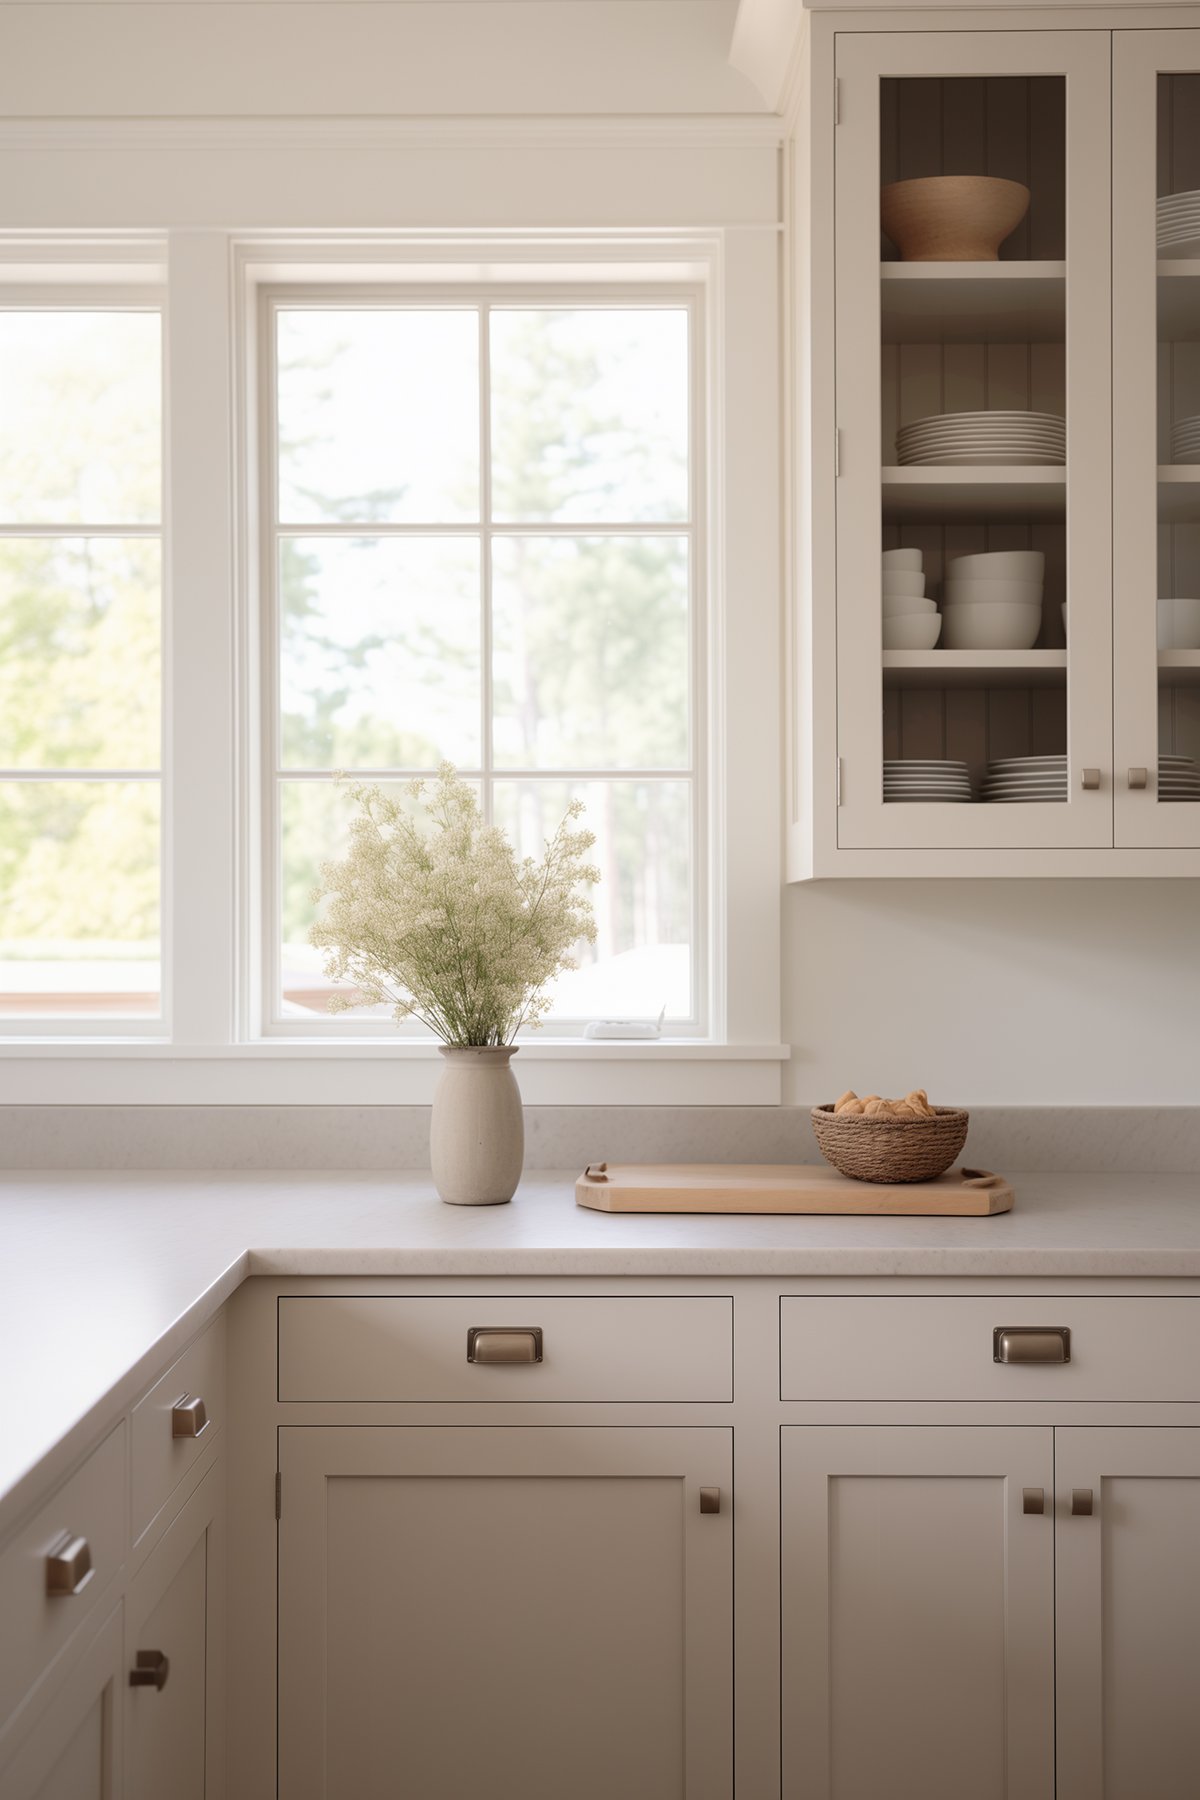 Edgecomb Gray kitchen cabinets with a window over the countertop and a vase of flowers on the counter.